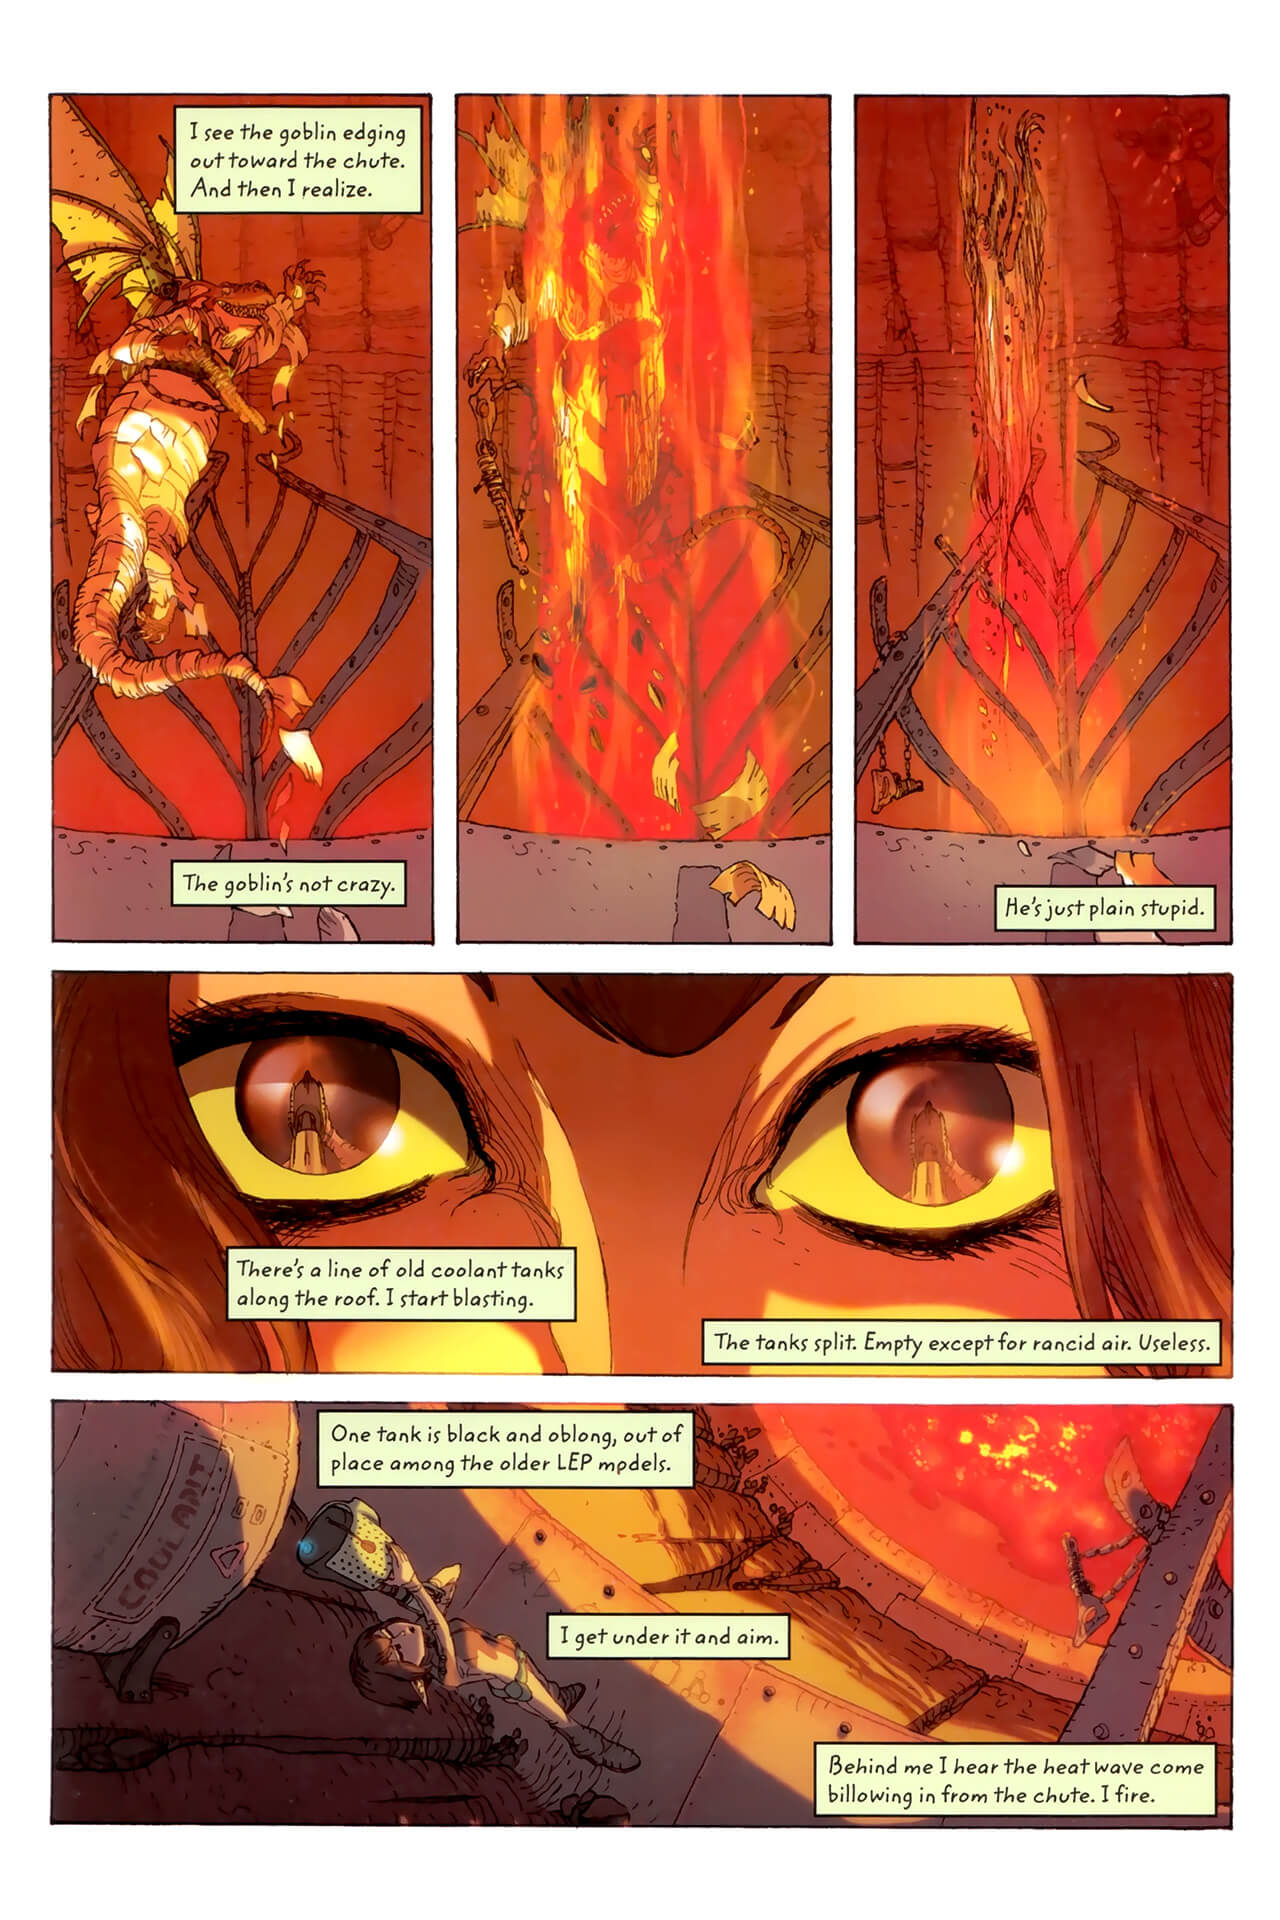 page 19 of artemis fowl the arctic incident graphic novel